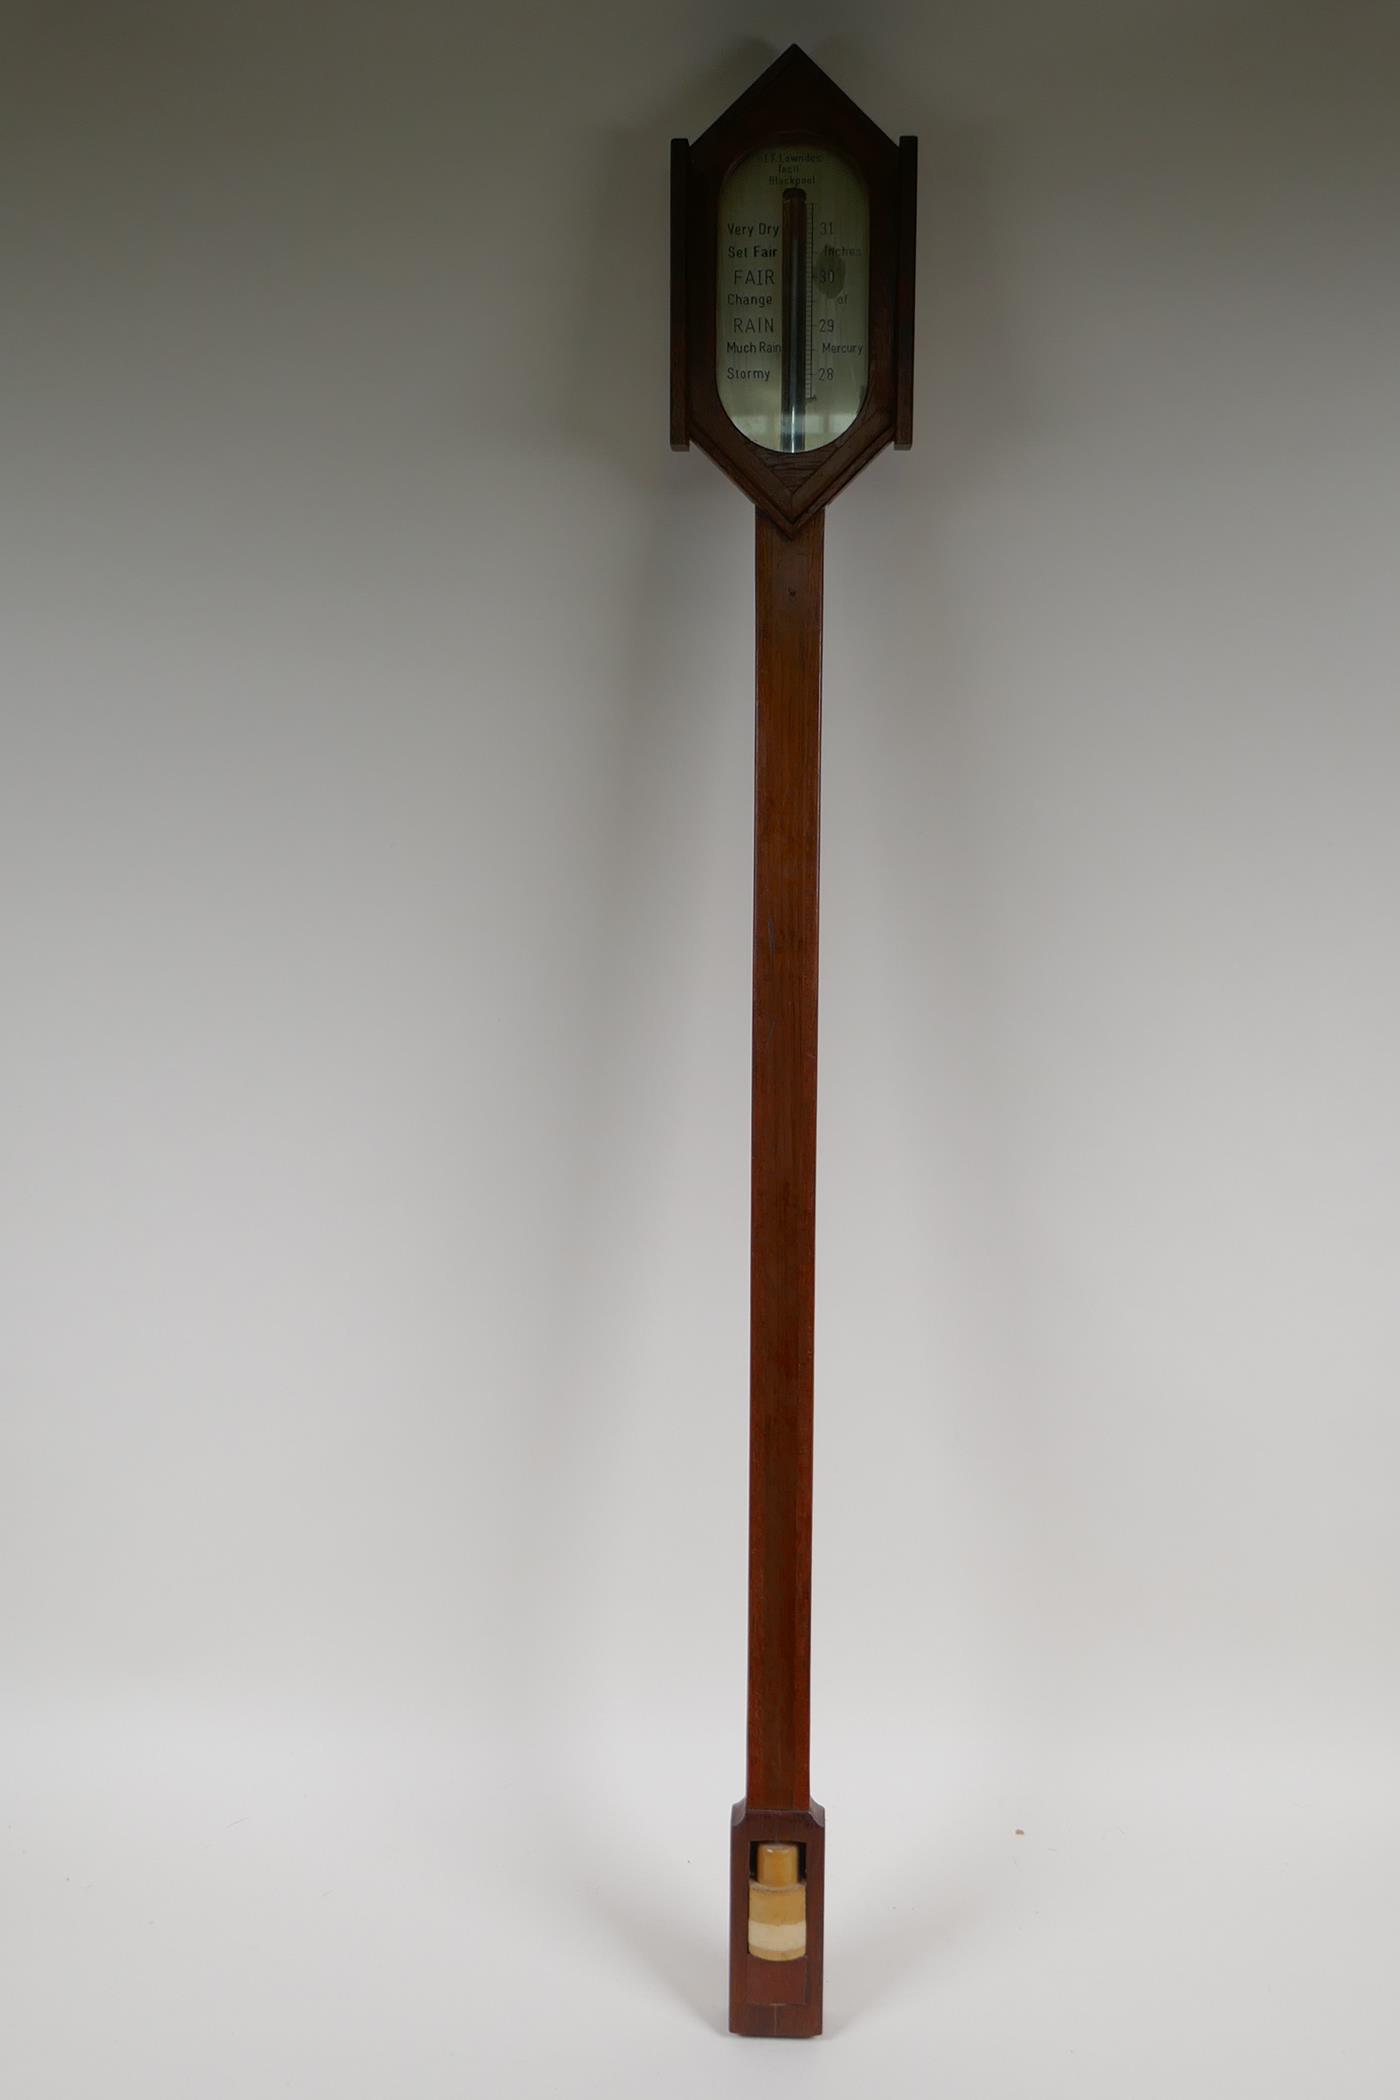 A mercury stick barometer by J.F. Lowndes of Blackpool, 37" long